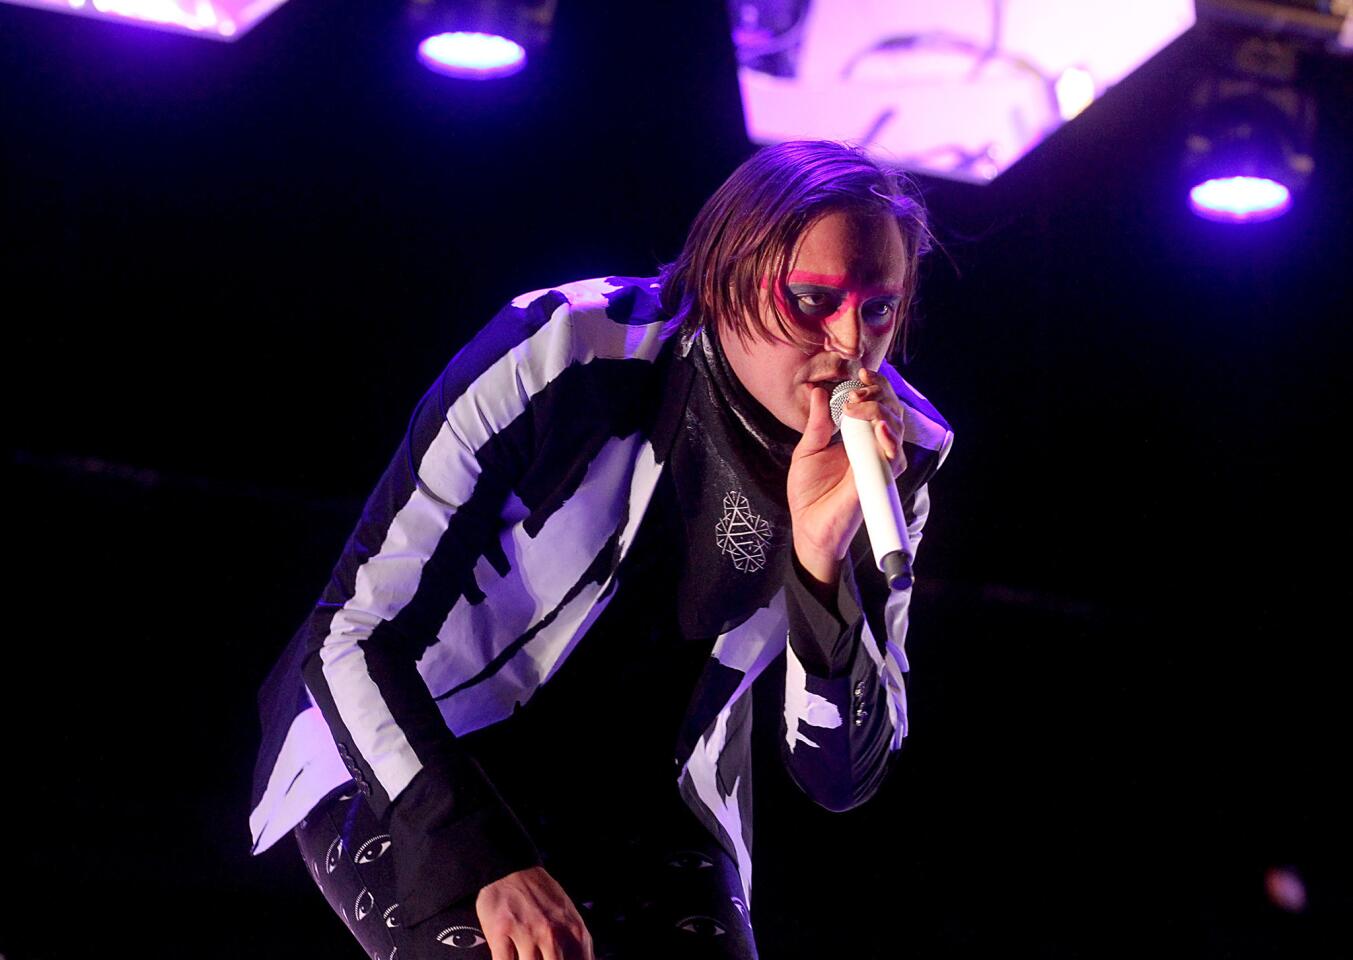 Arcade Fire lead vocalist Win Butler performs on the main stage on the third night of the Coachella Valley Music and Arts Festival in Indio.